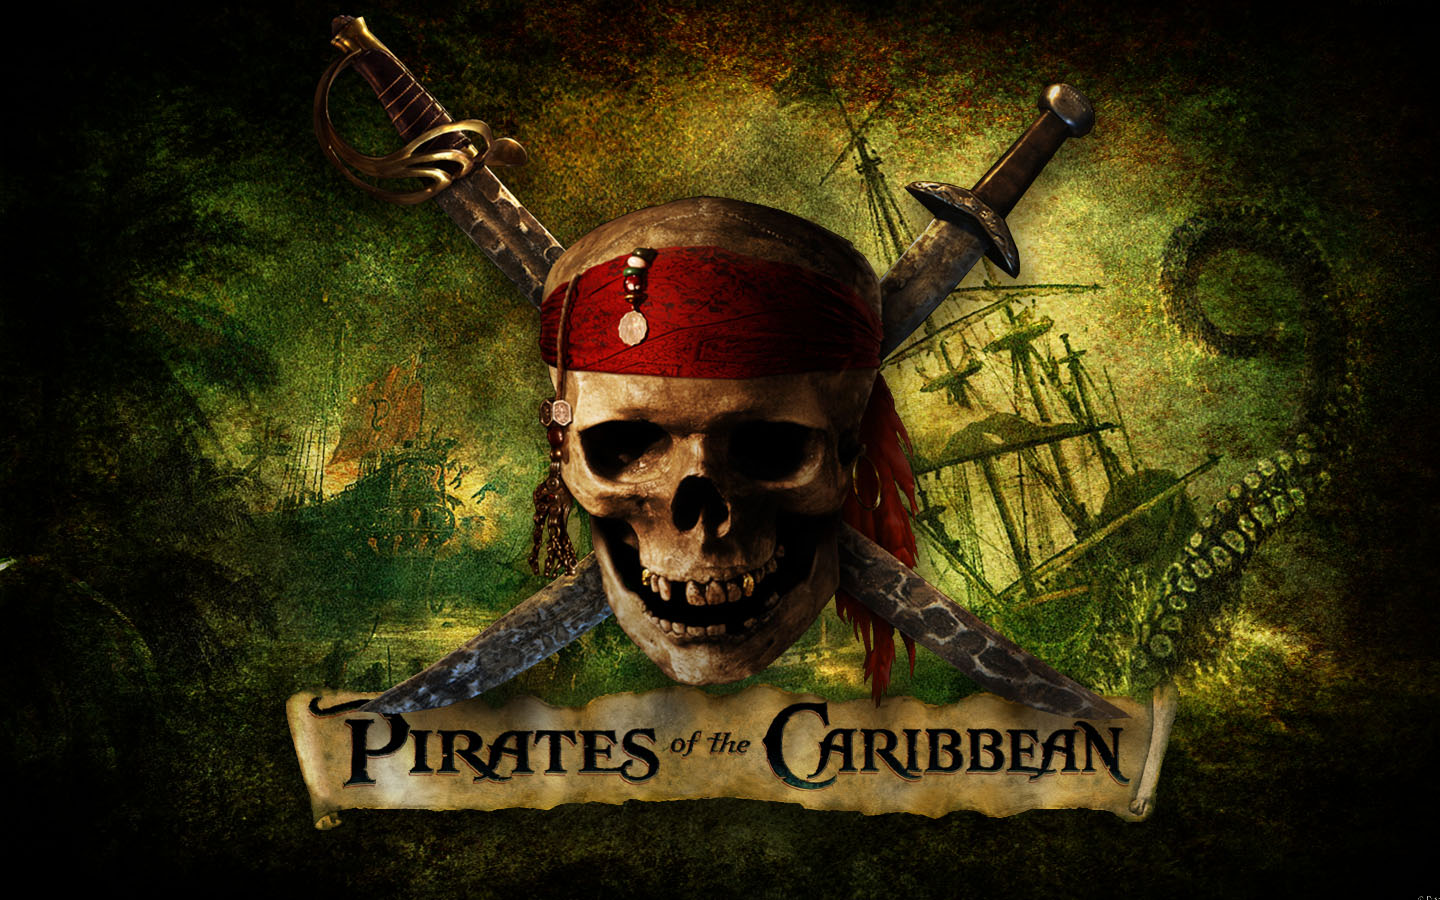 Free download pirates of the caribbean logo posters pirates of the caribbean logo [1440x900] for your Desktop, Mobile & Tablet. Explore Pirates of the Caribbean Wallpaper. Caribbean Wallpaper Widescreen